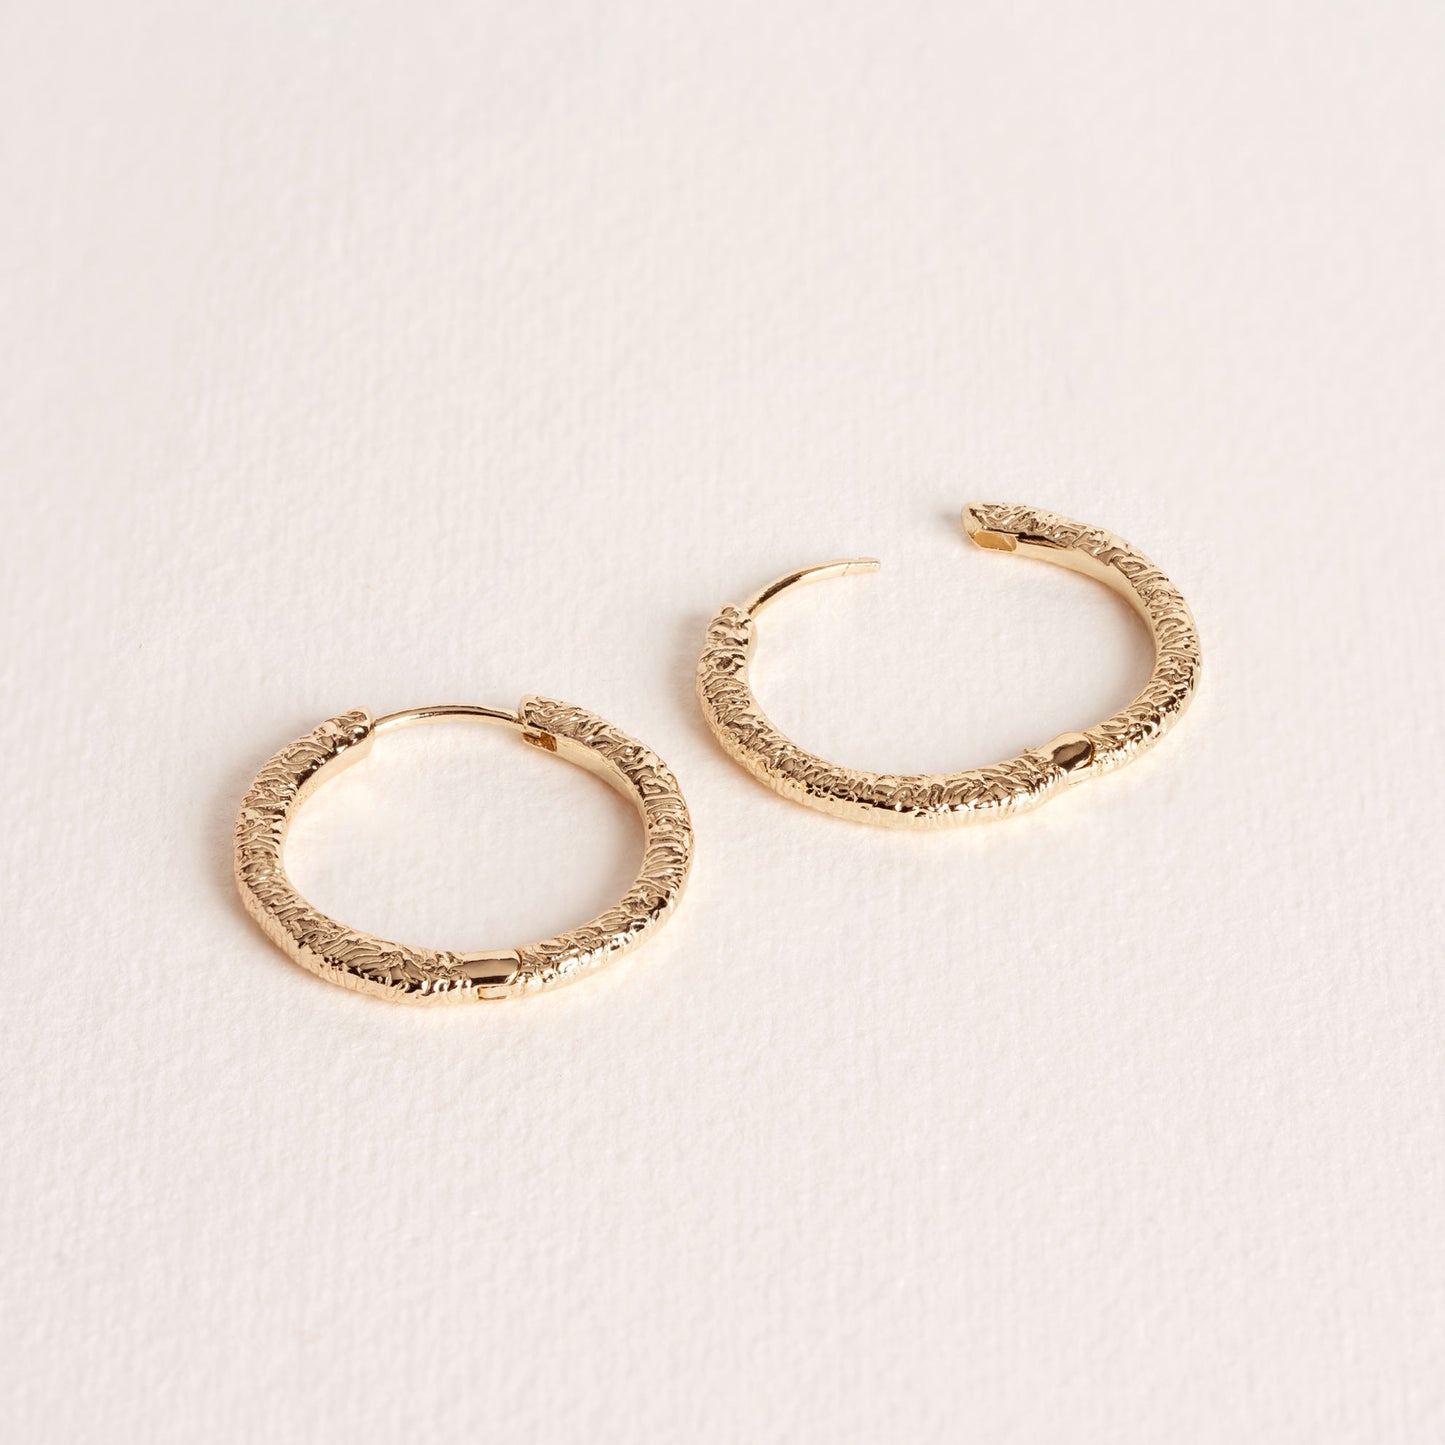 Angel - Round - 25mm - Gold Plated Hoop Earrings - Ana et Cha